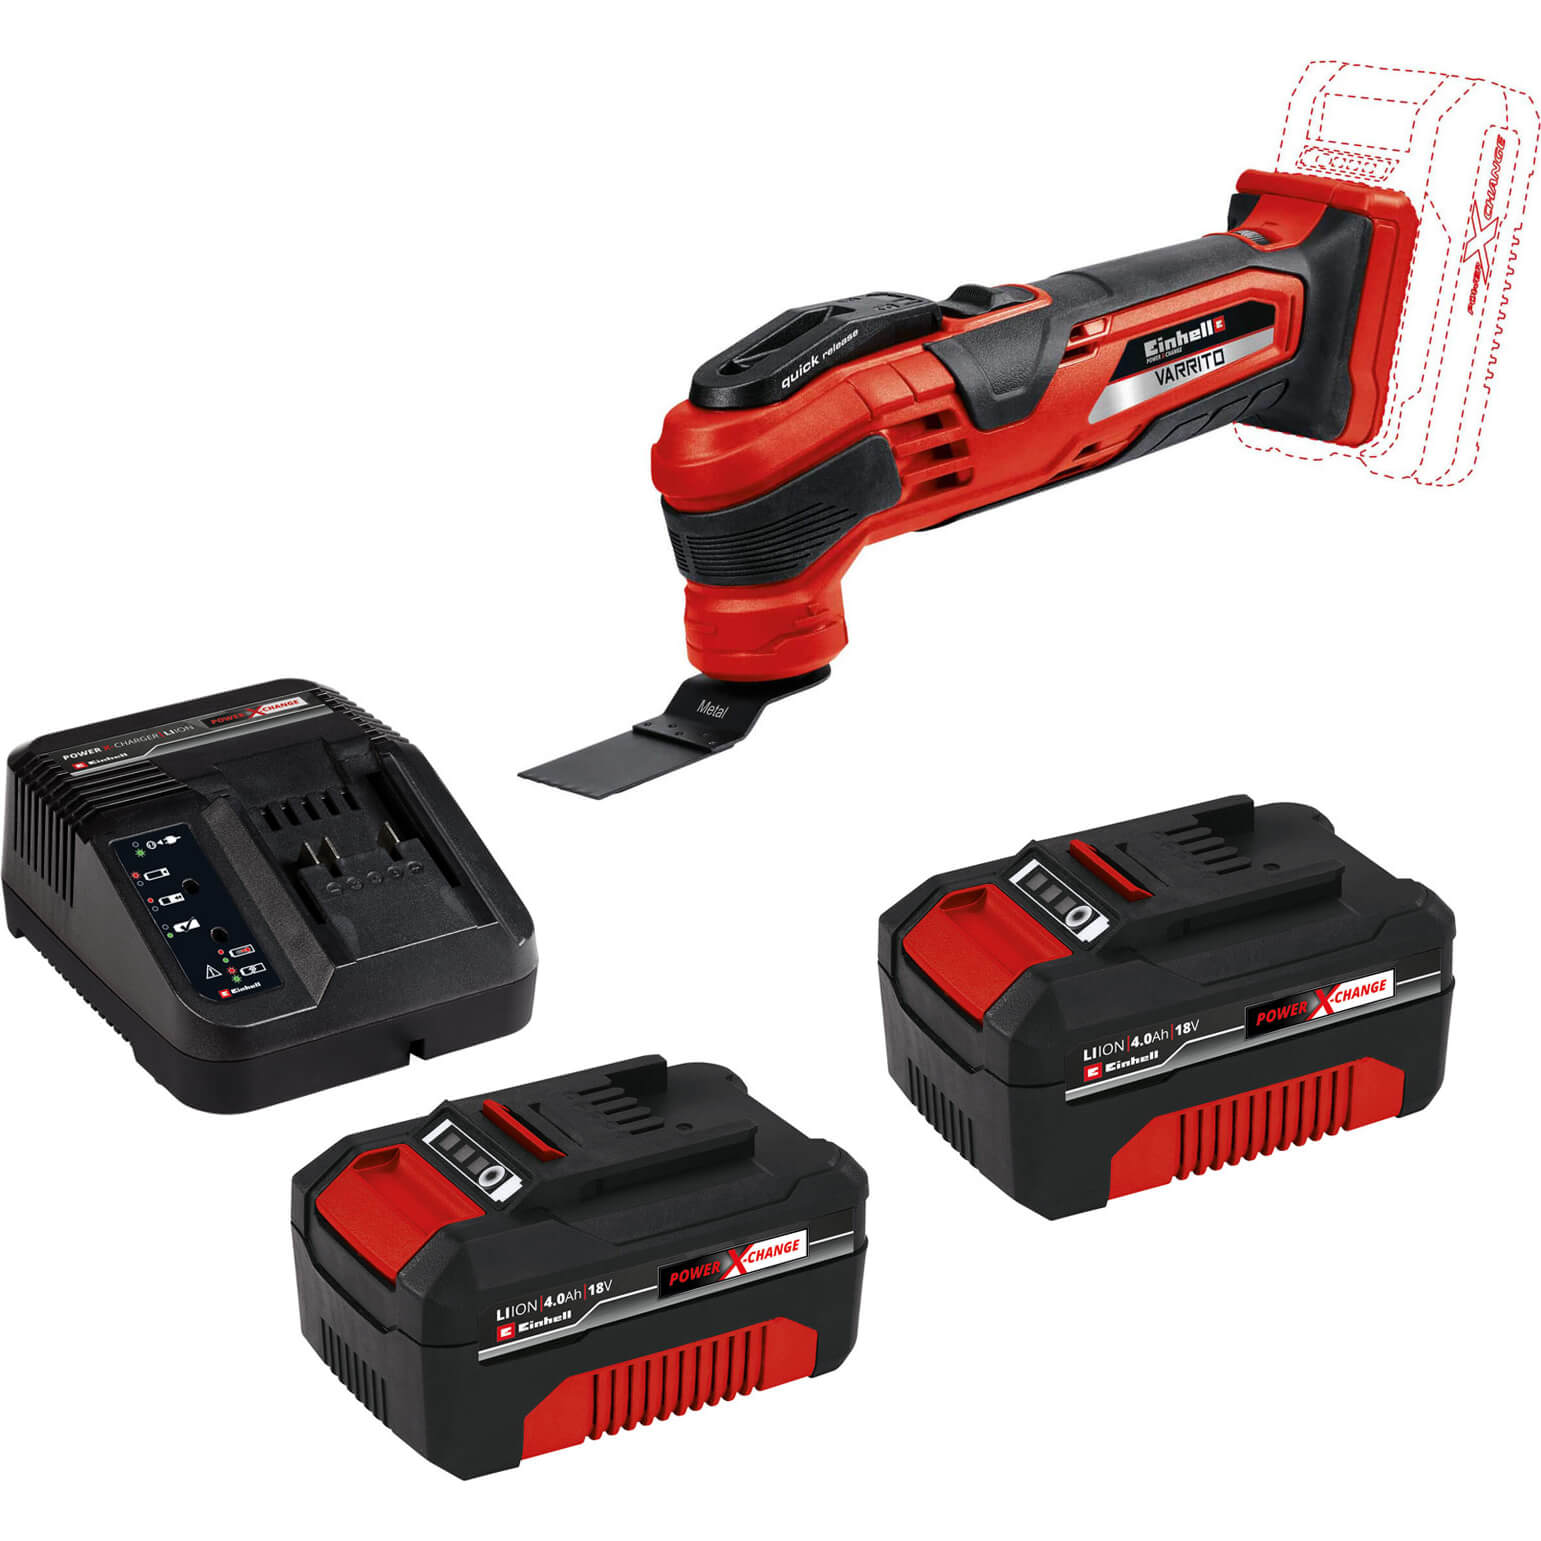 Image of Einhell VARRITO 18v Cordless Oscillating Multi Tool 2 x 4ah Li-ion Charger No Case